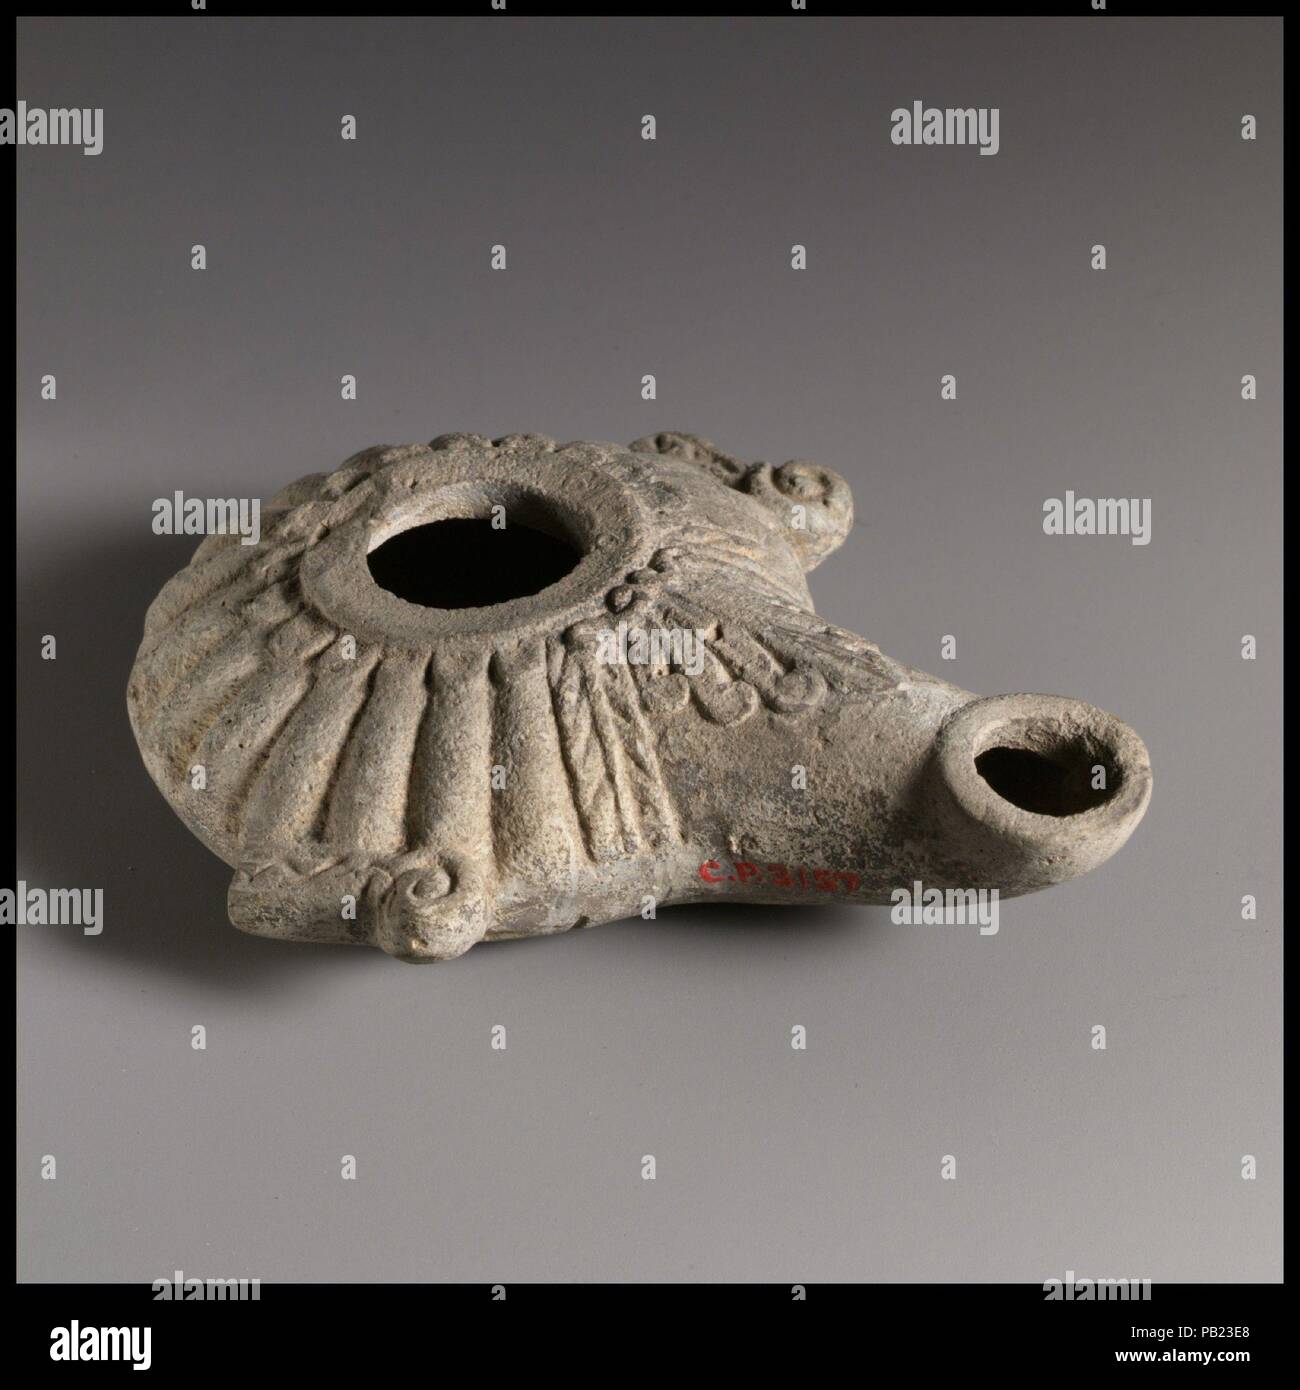 Terrracotta oil lamp. Culture: Greek. Dimensions: Overall: 1 1/8 x 3 3/4 in. (2.9 x 9.5 cm). Museum: Metropolitan Museum of Art, New York, USA. Stock Photo